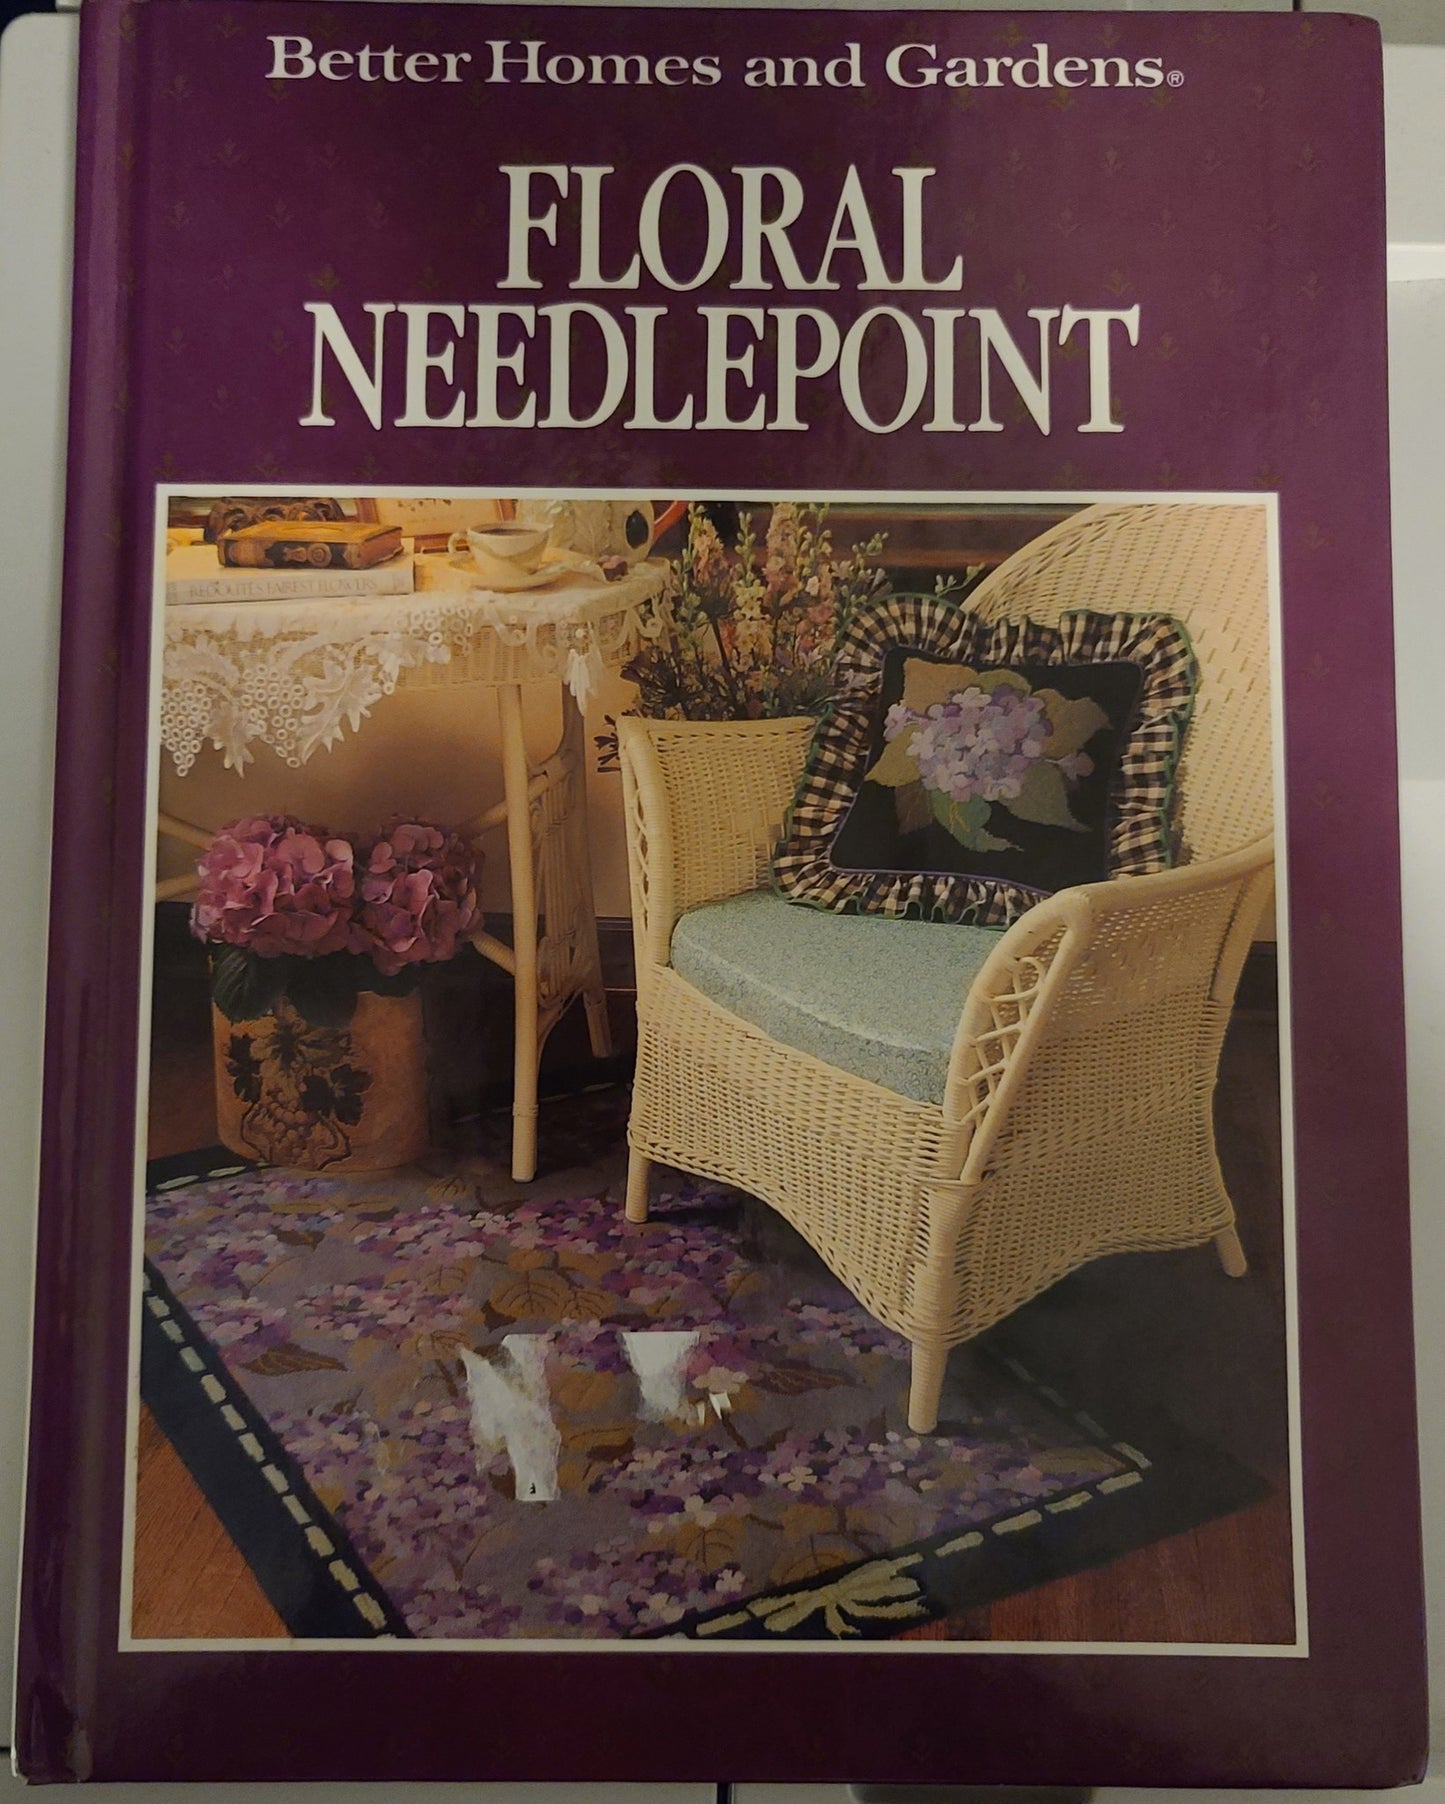 Better Homes & Gardens: Floral Needlepoint